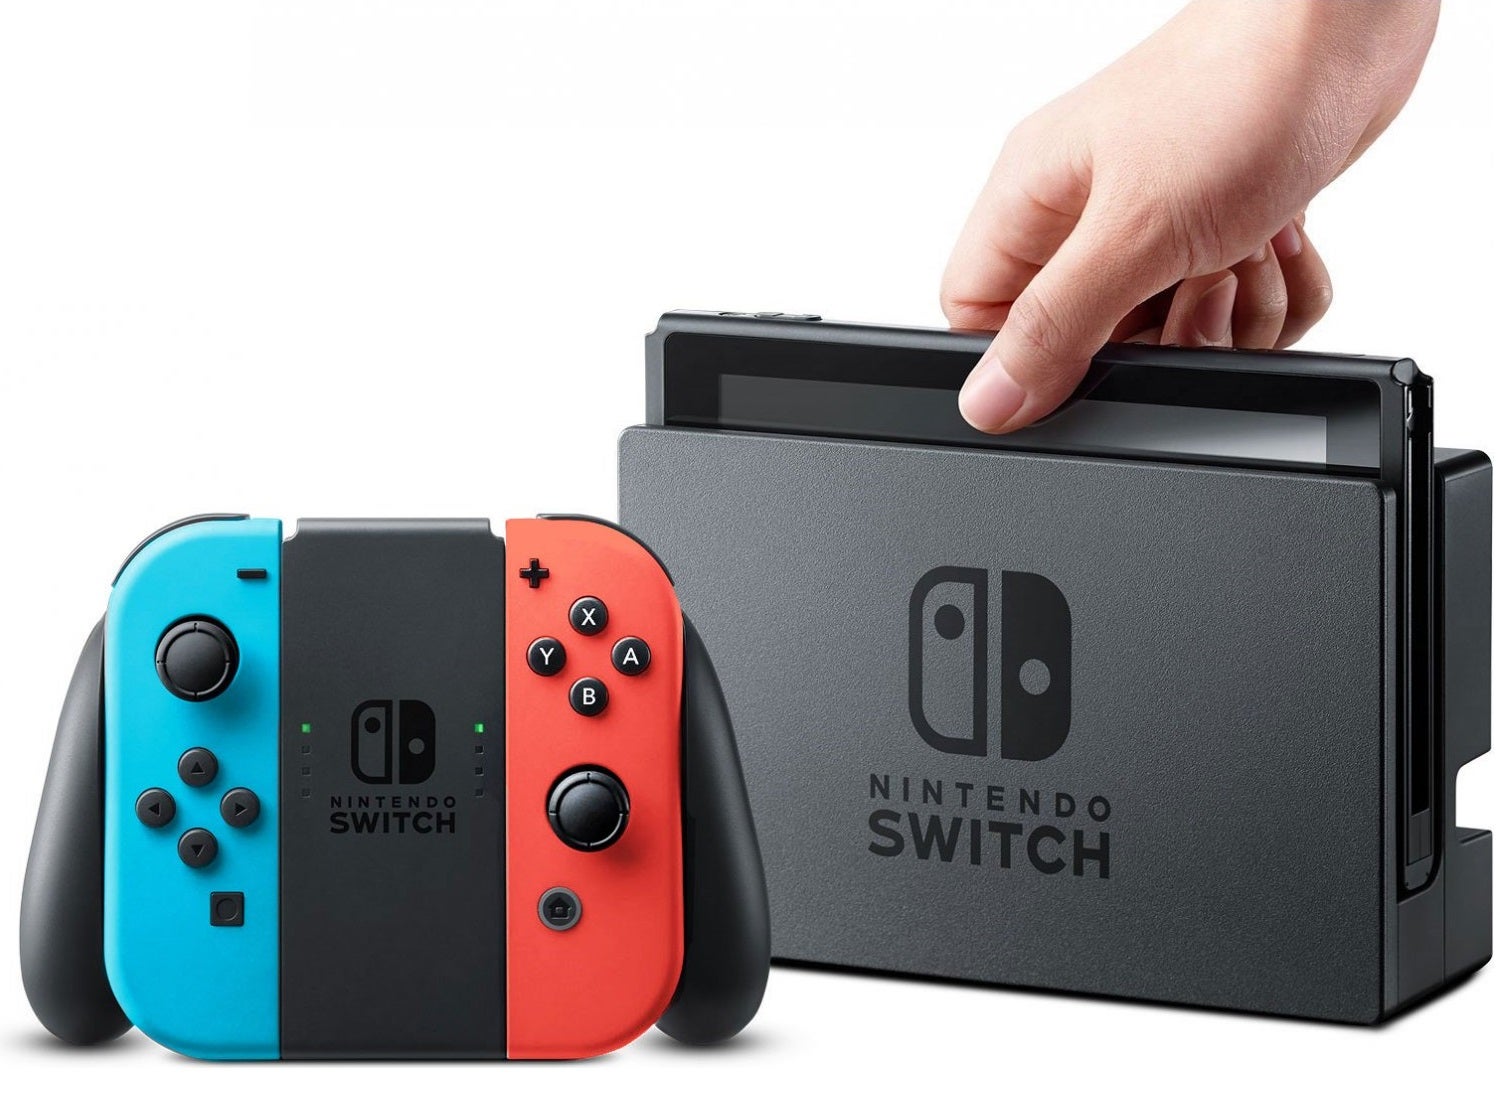 Image for The smaller "budget friendly" Switch will launch in late June - report